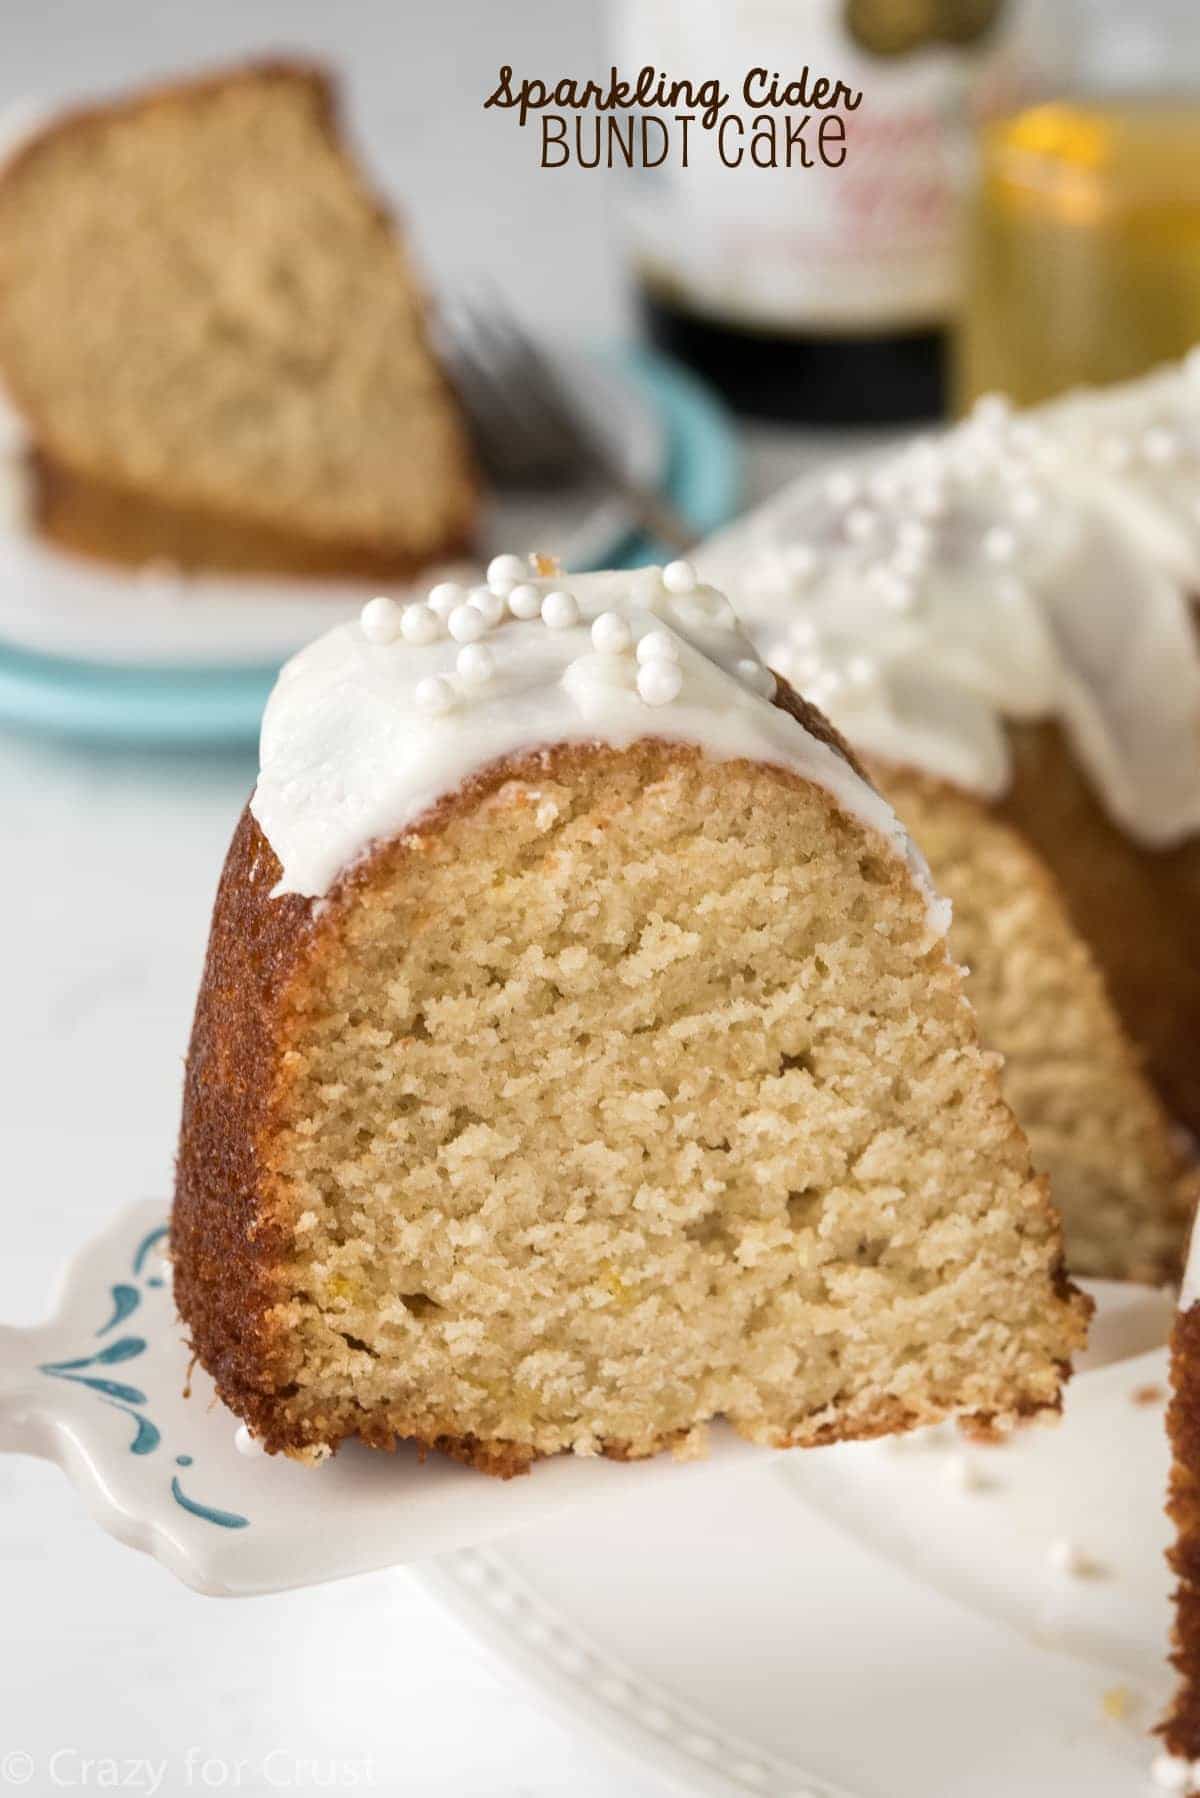 Sparkling Apple Cider Cake - this easy recipe uses Sparkling Apple Cider in every part of the recipe! Perfect for a party!